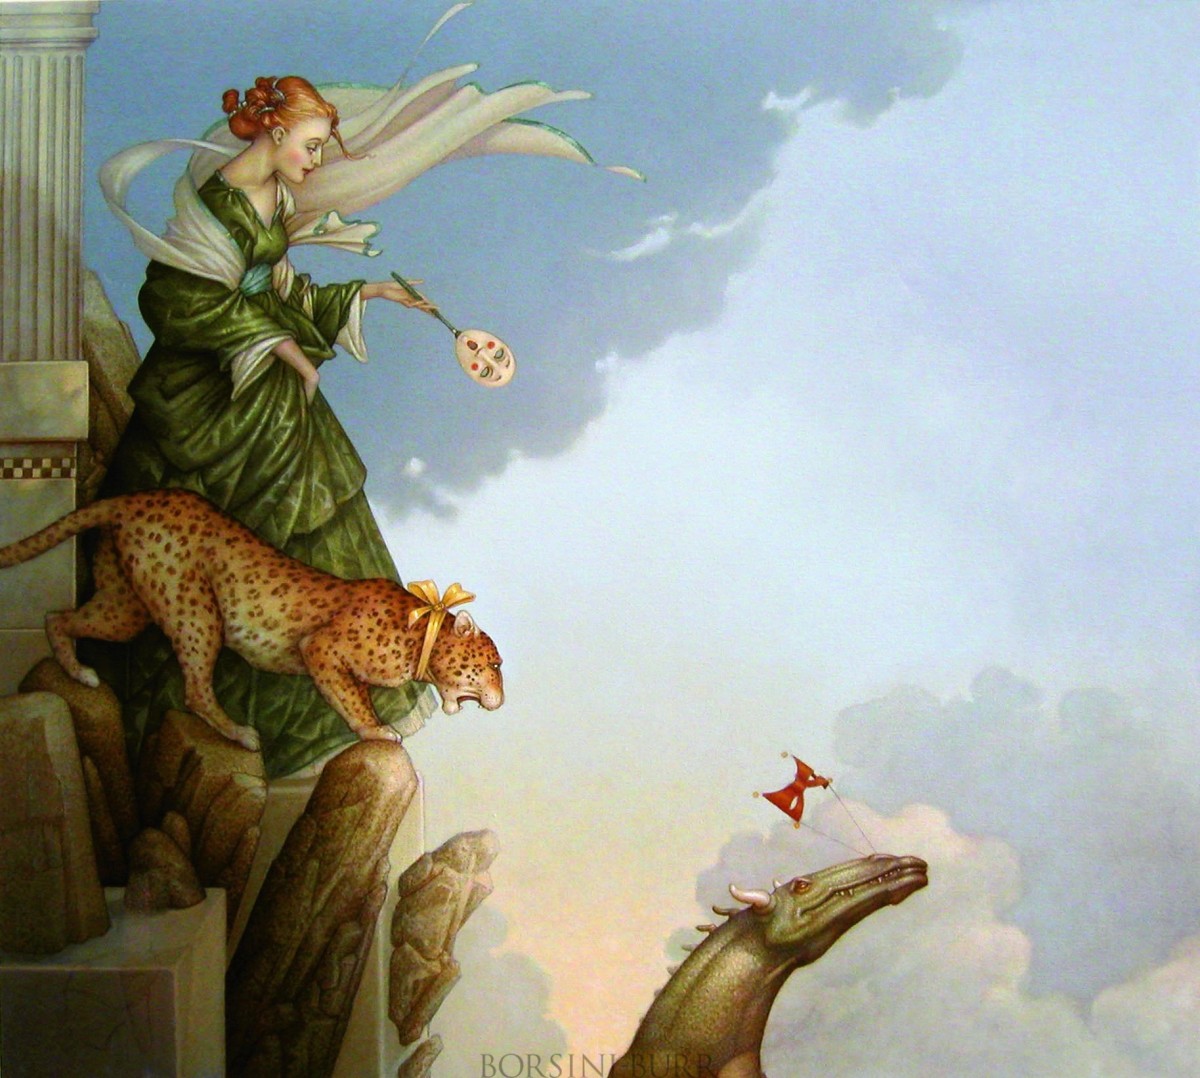 "Fearless" Fine Art Edition on Canvas by Michael Parkes.